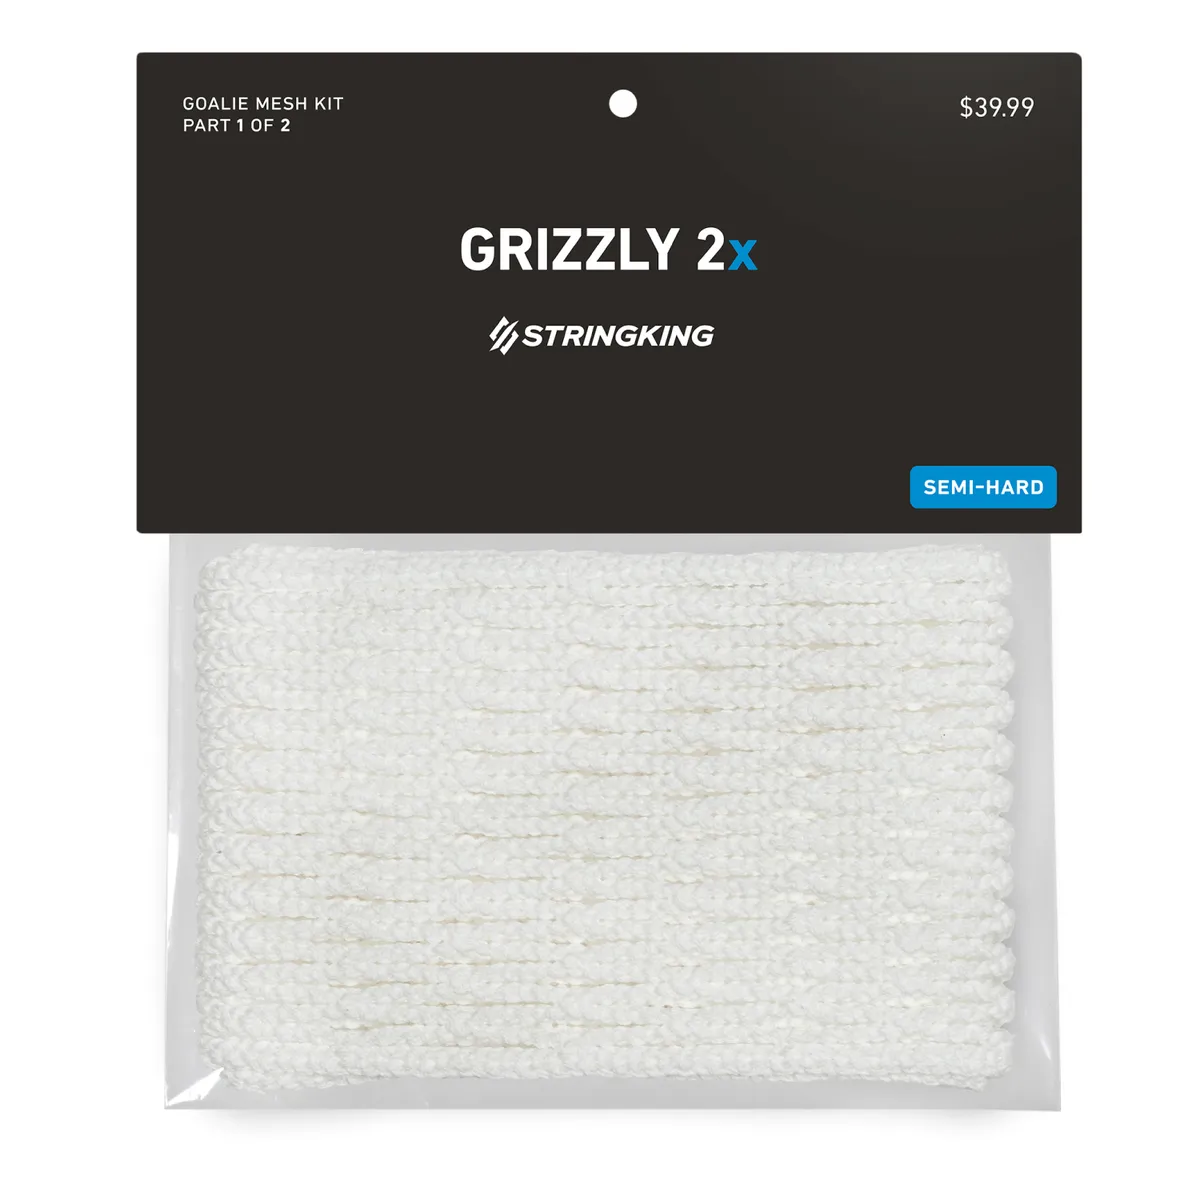 StringKing Grizzly 2x Goalie Lacrosse Mesh White Packaged